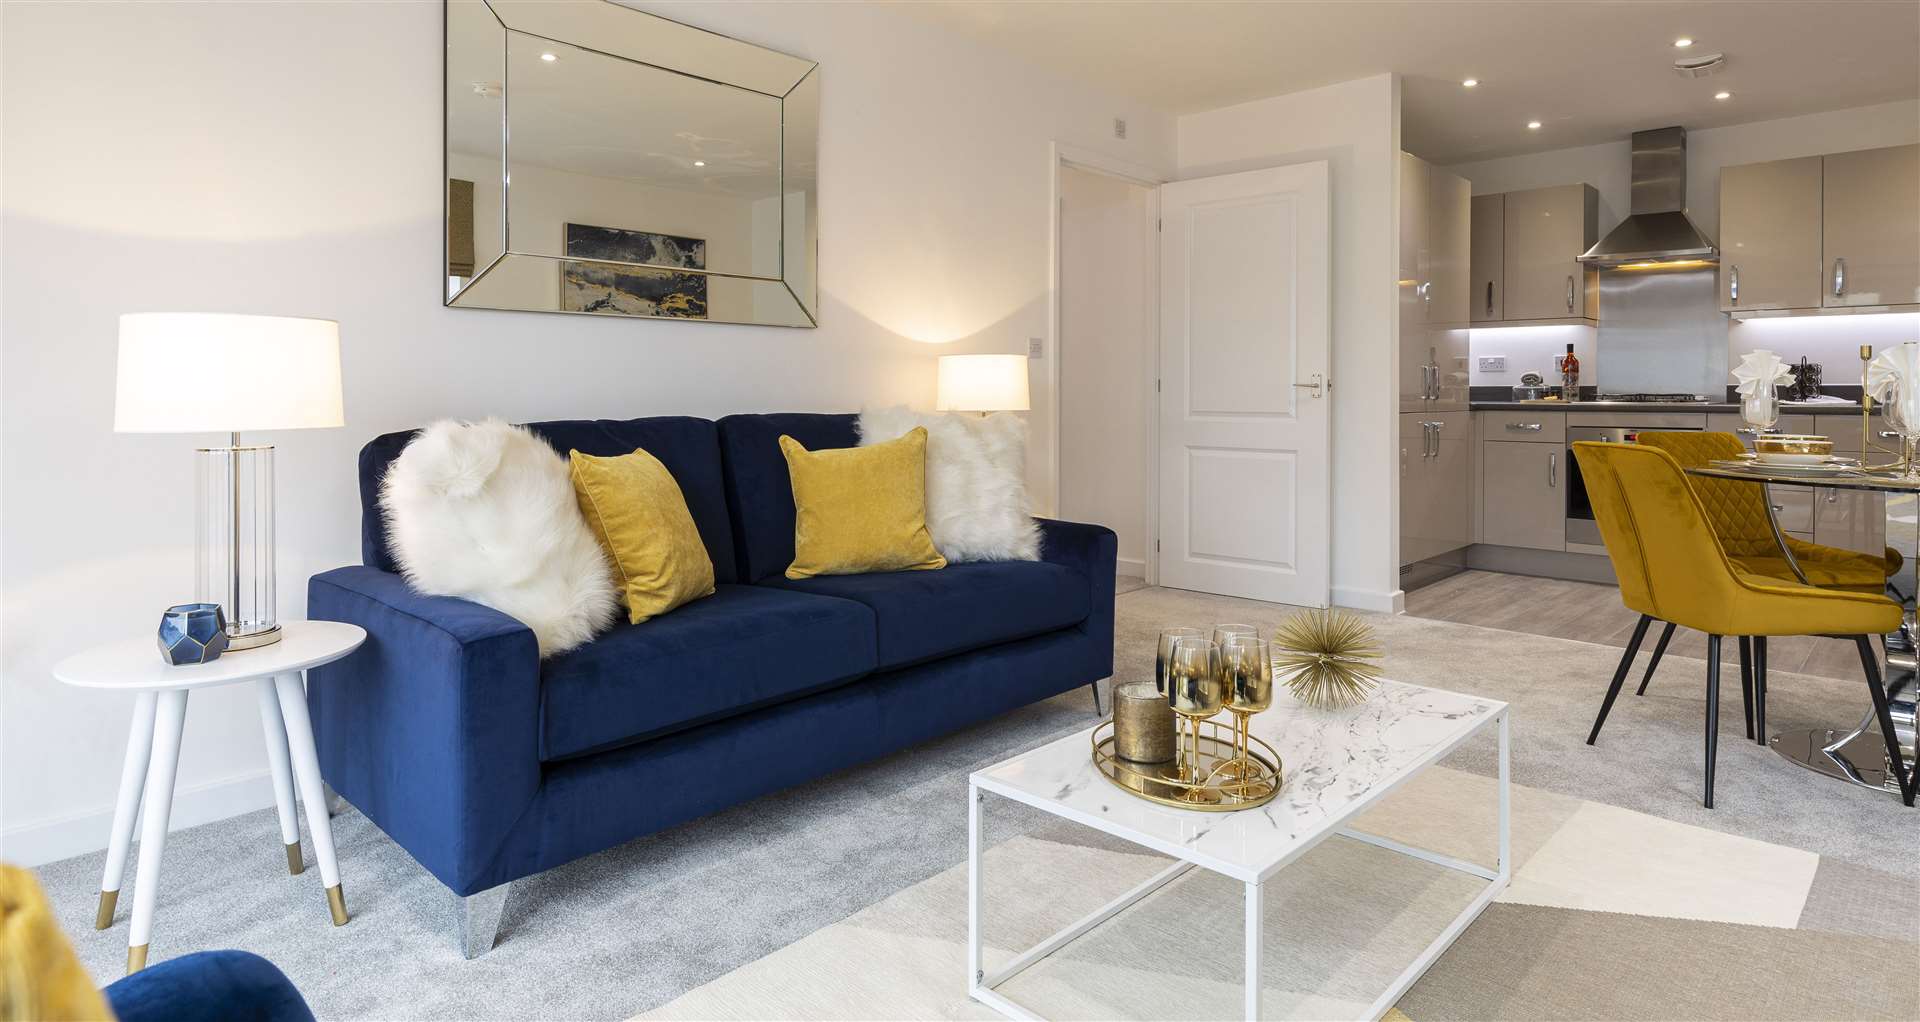 These apartments are the perfect way to get onto the property ladder!